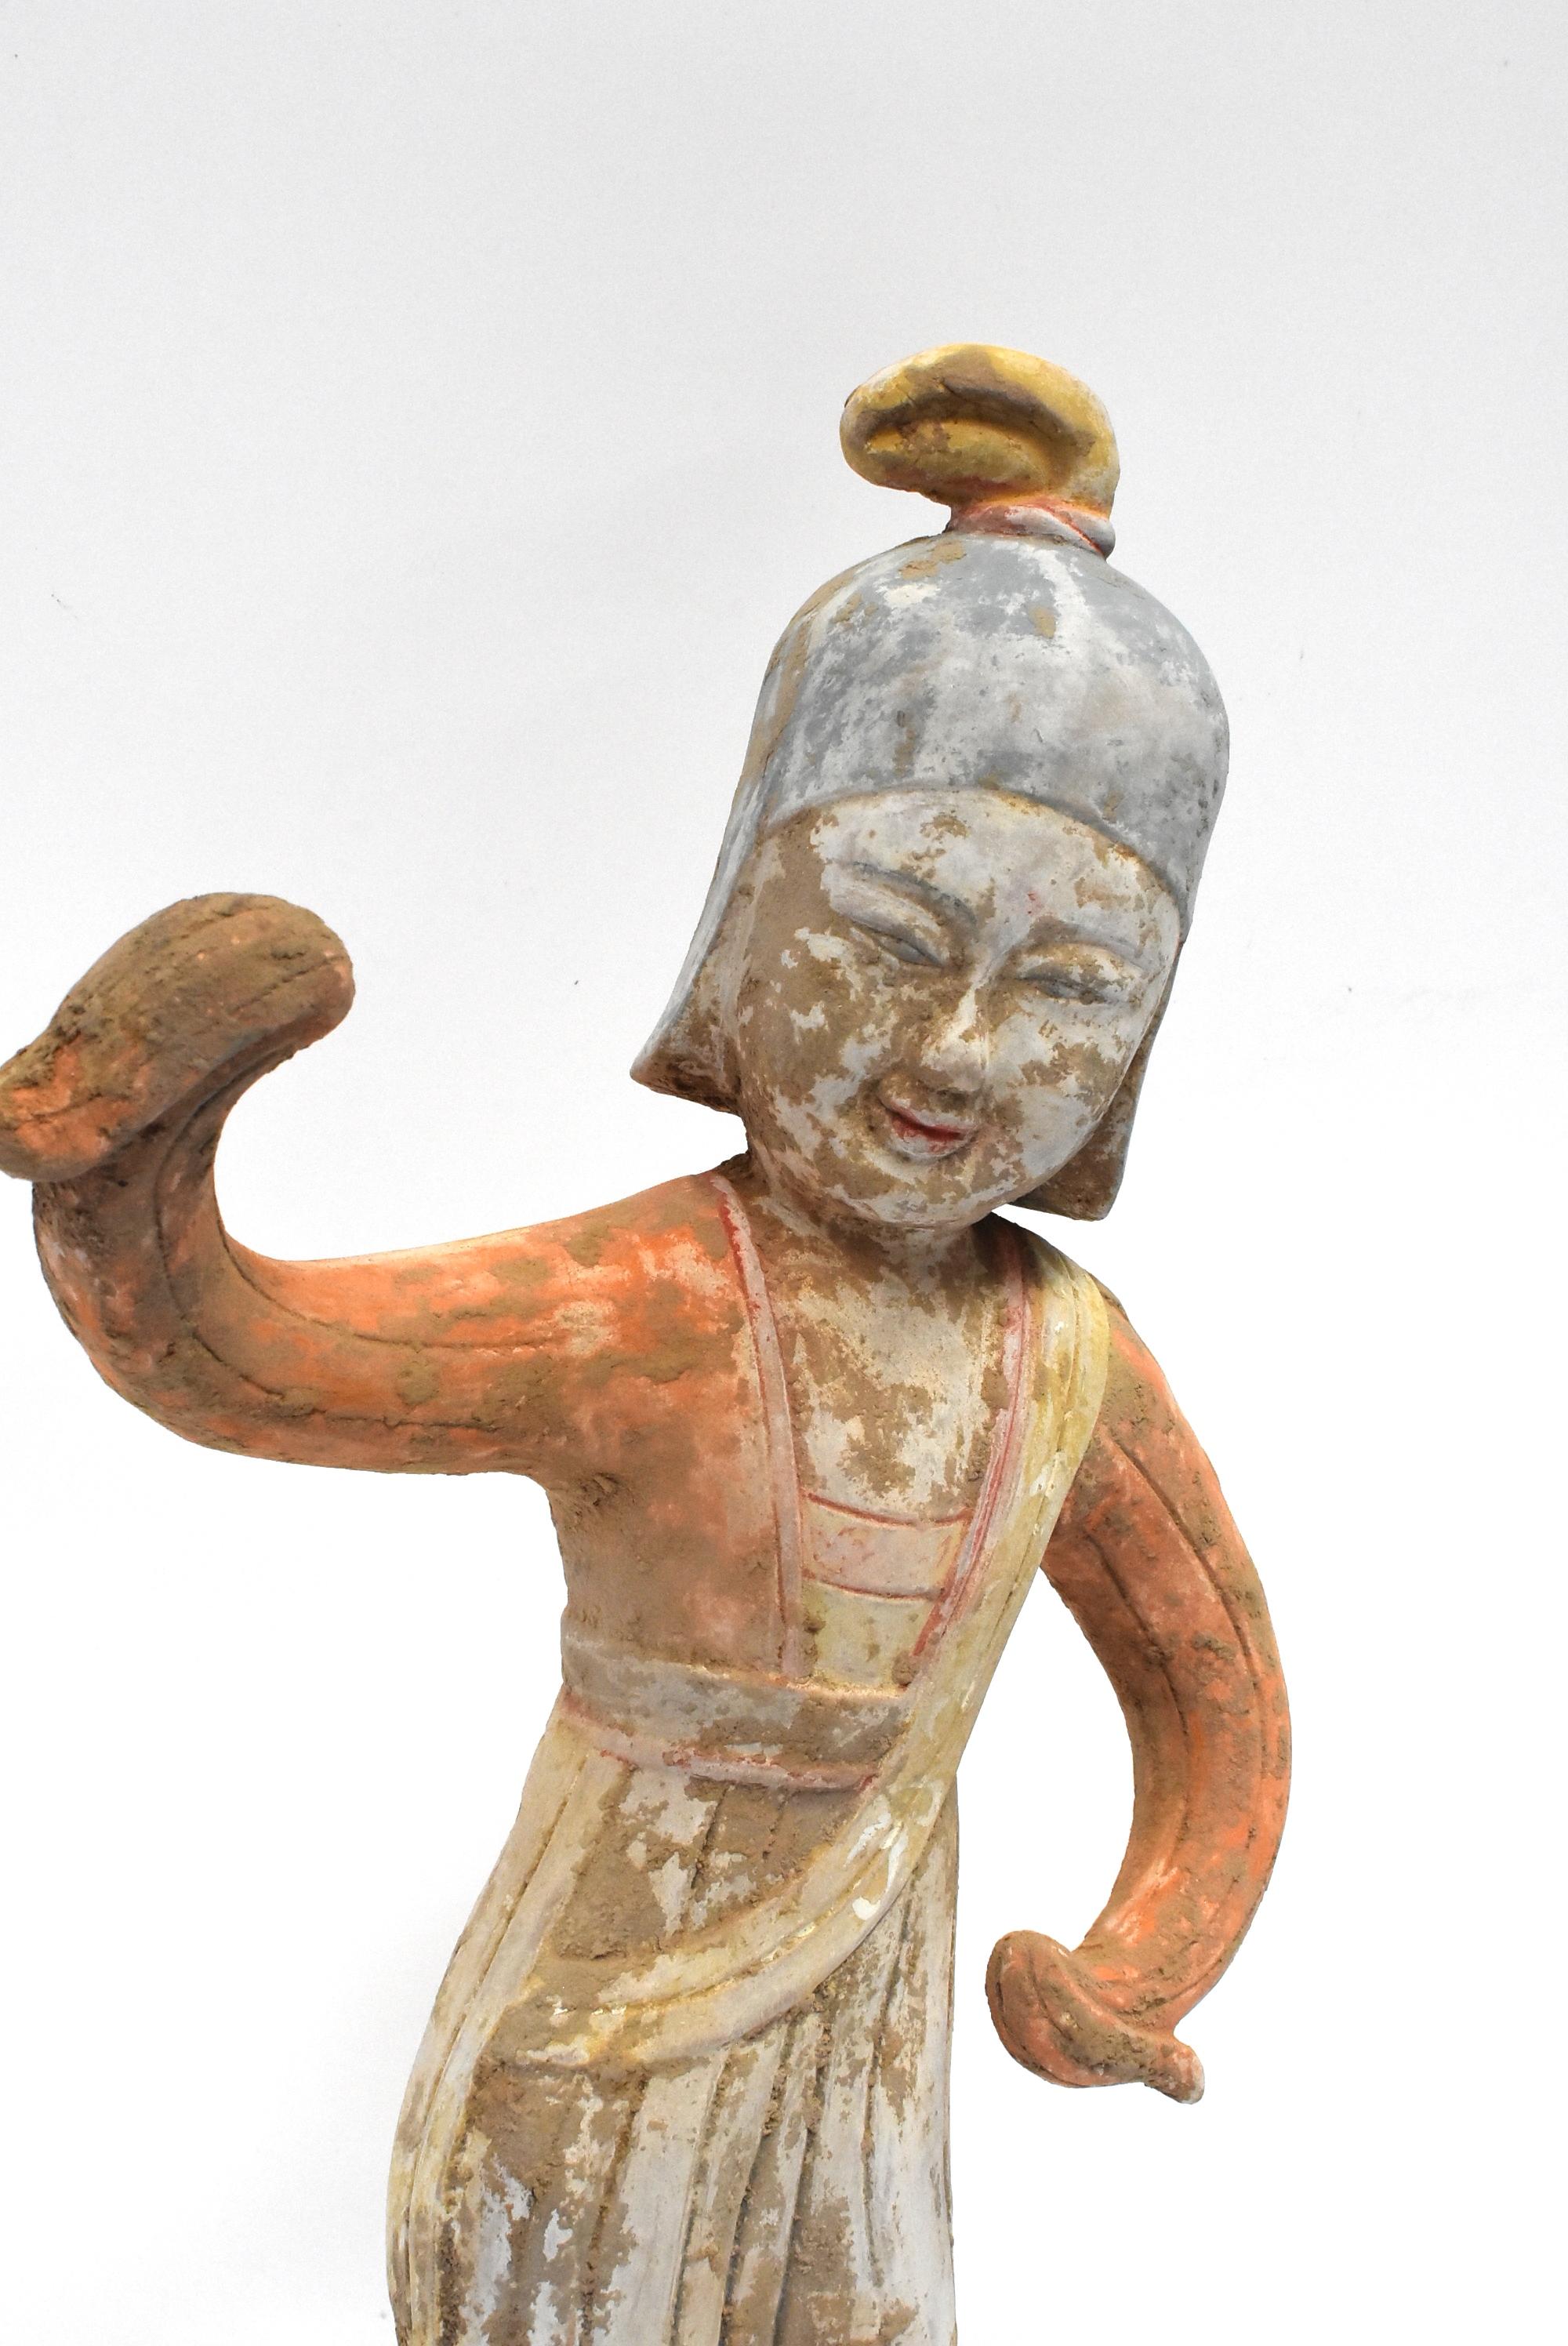 A beautiful pottery figure, Han style, in orange and pastel colors. What's special about this piece is the figure's facial expression. She is joyful. A pale blue military style helmet indicates her dance is of a sort that is a tribute to victory.